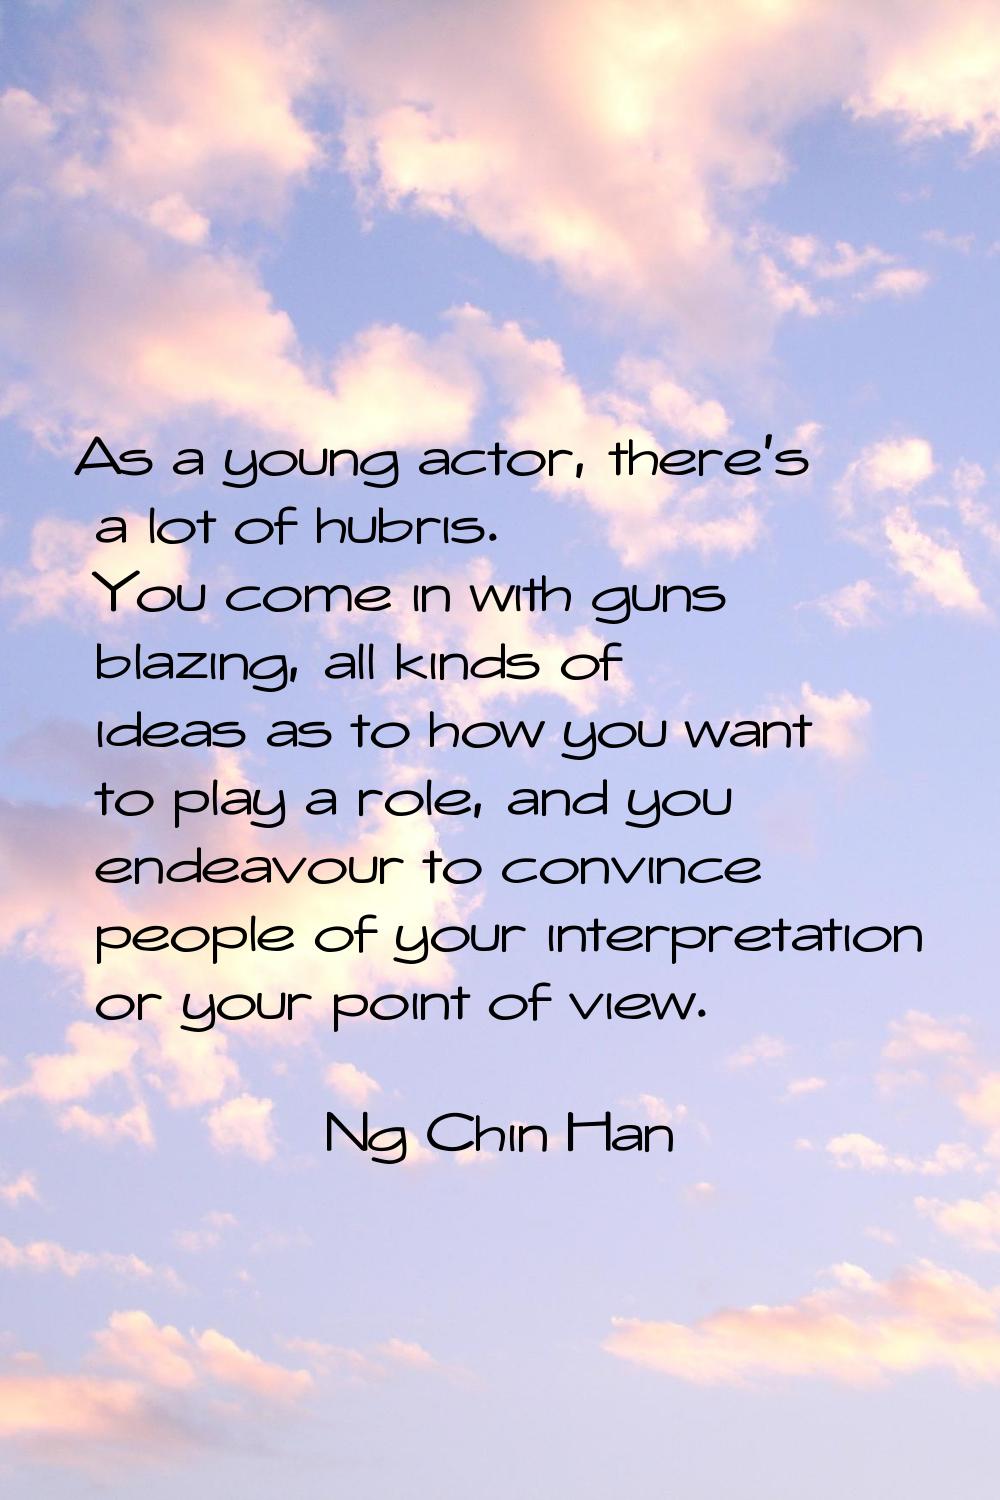 As a young actor, there's a lot of hubris. You come in with guns blazing, all kinds of ideas as to 